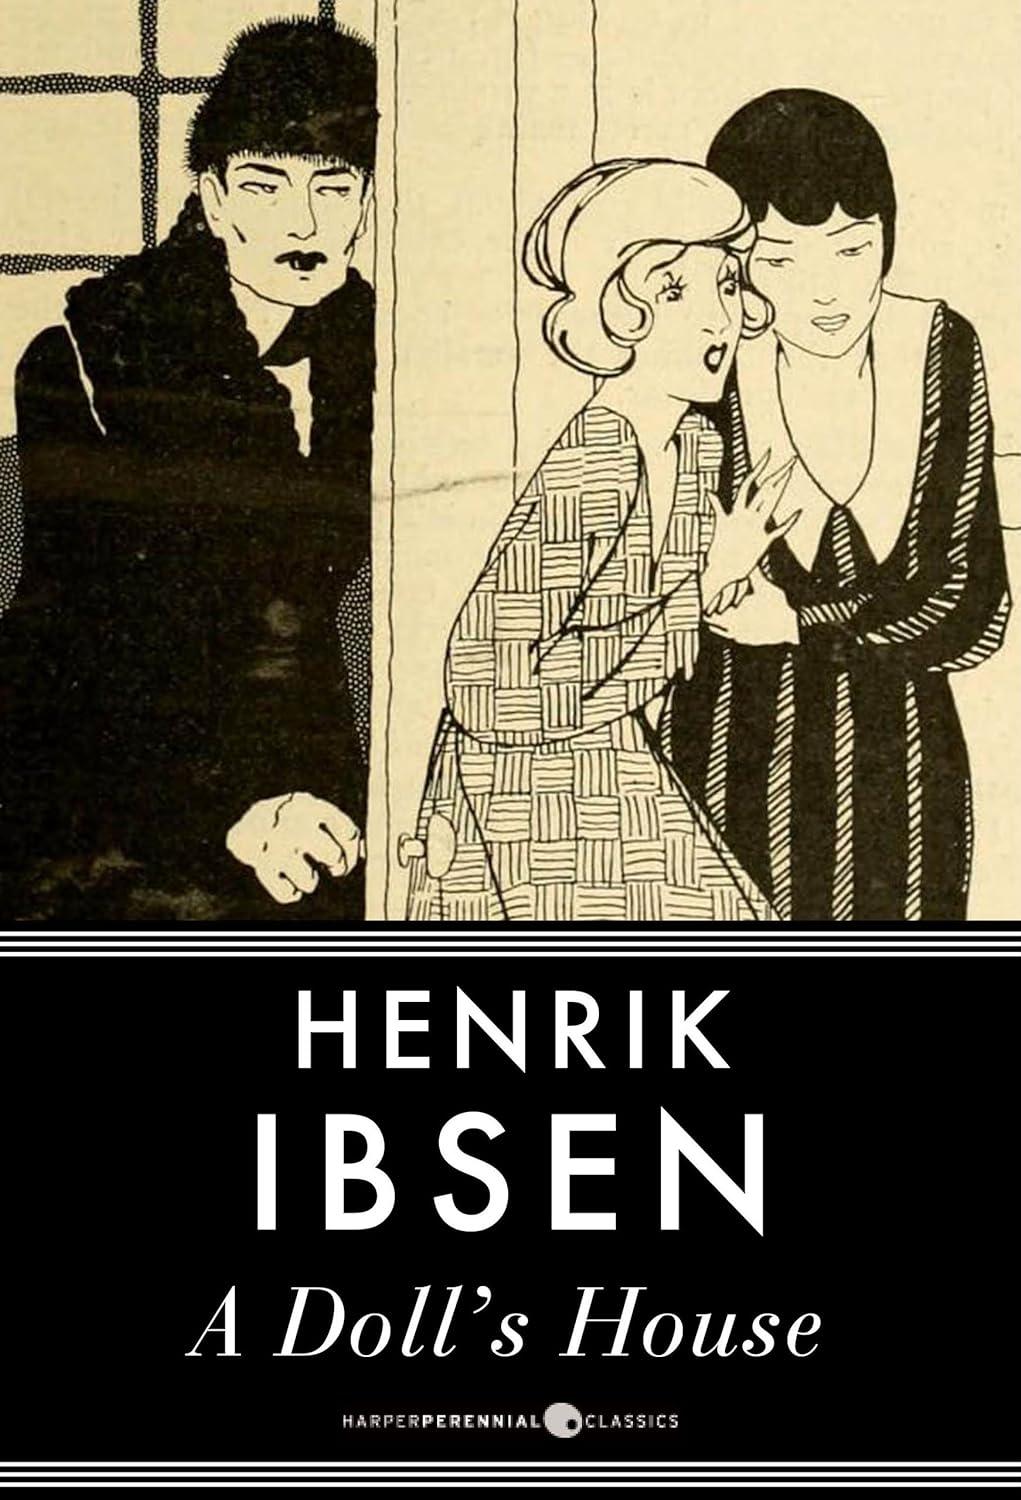 A Doll's House by Henrik Ibsen - Study Guide & Literary Devices